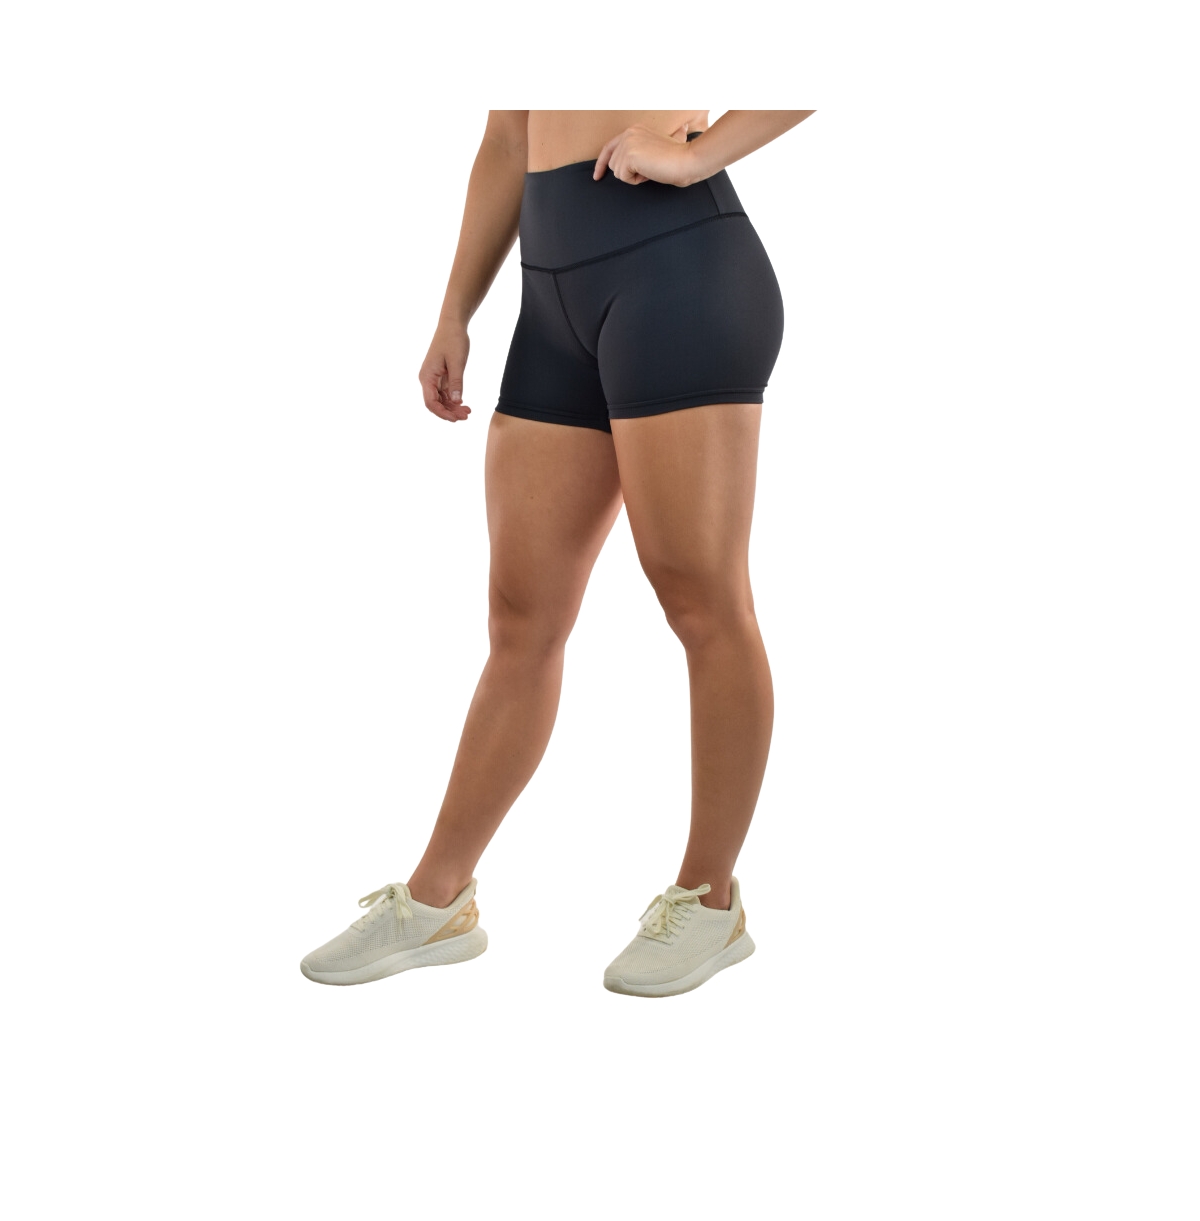 Women's Leakproof Activewear High-Rise Shorts For Bladder Leaks and Periods - Black